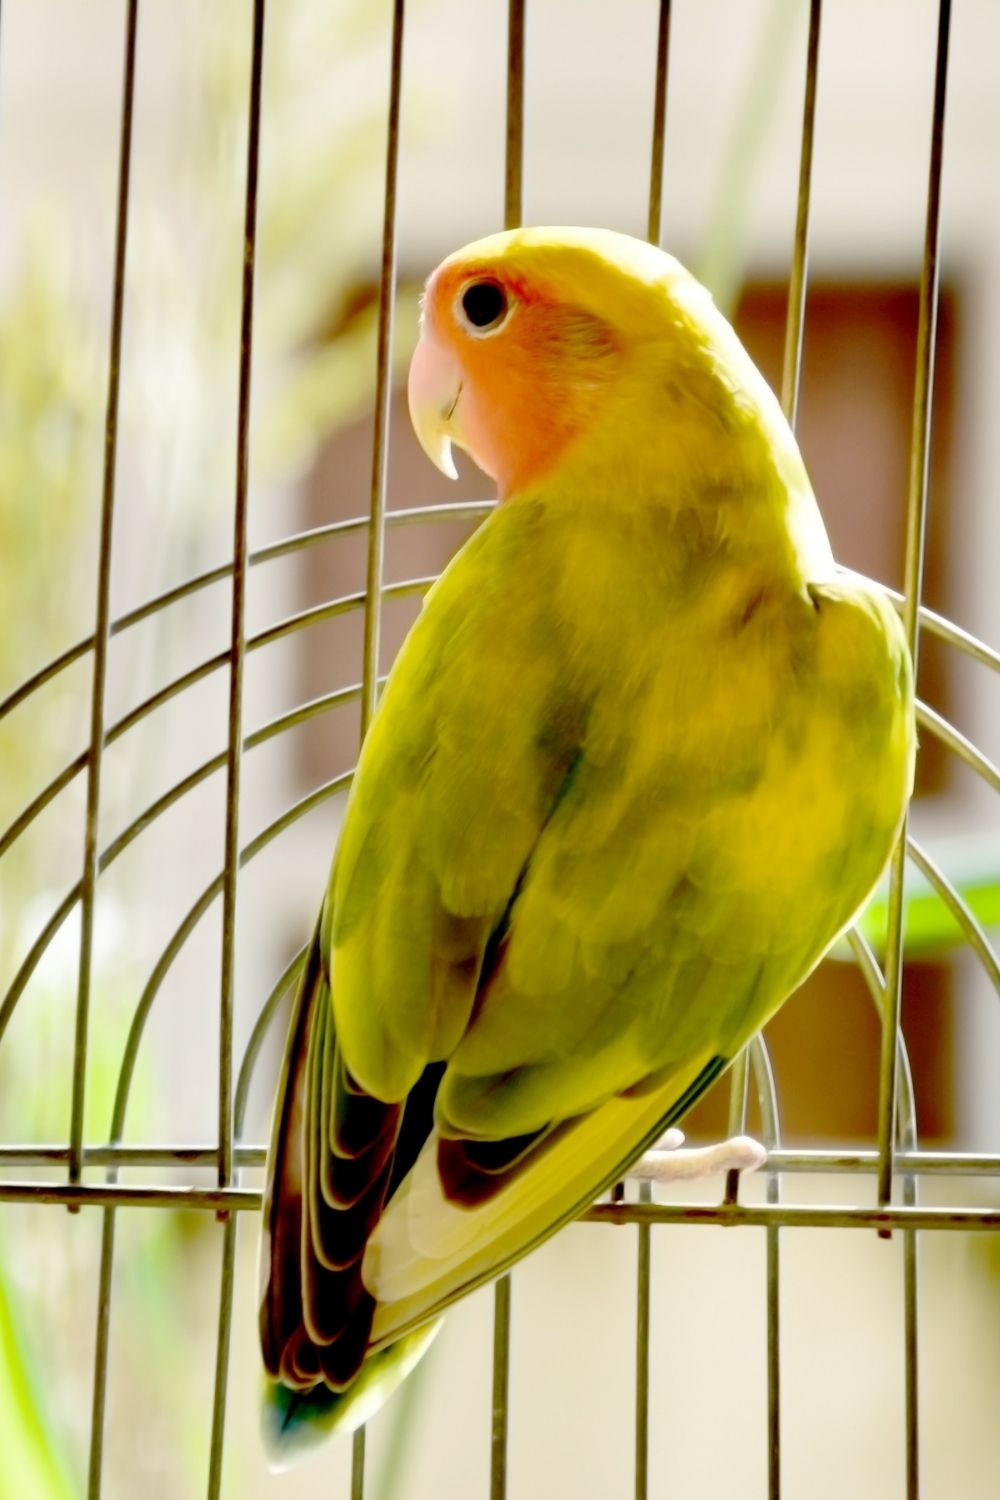 Tips for Keeping Birds as Pets